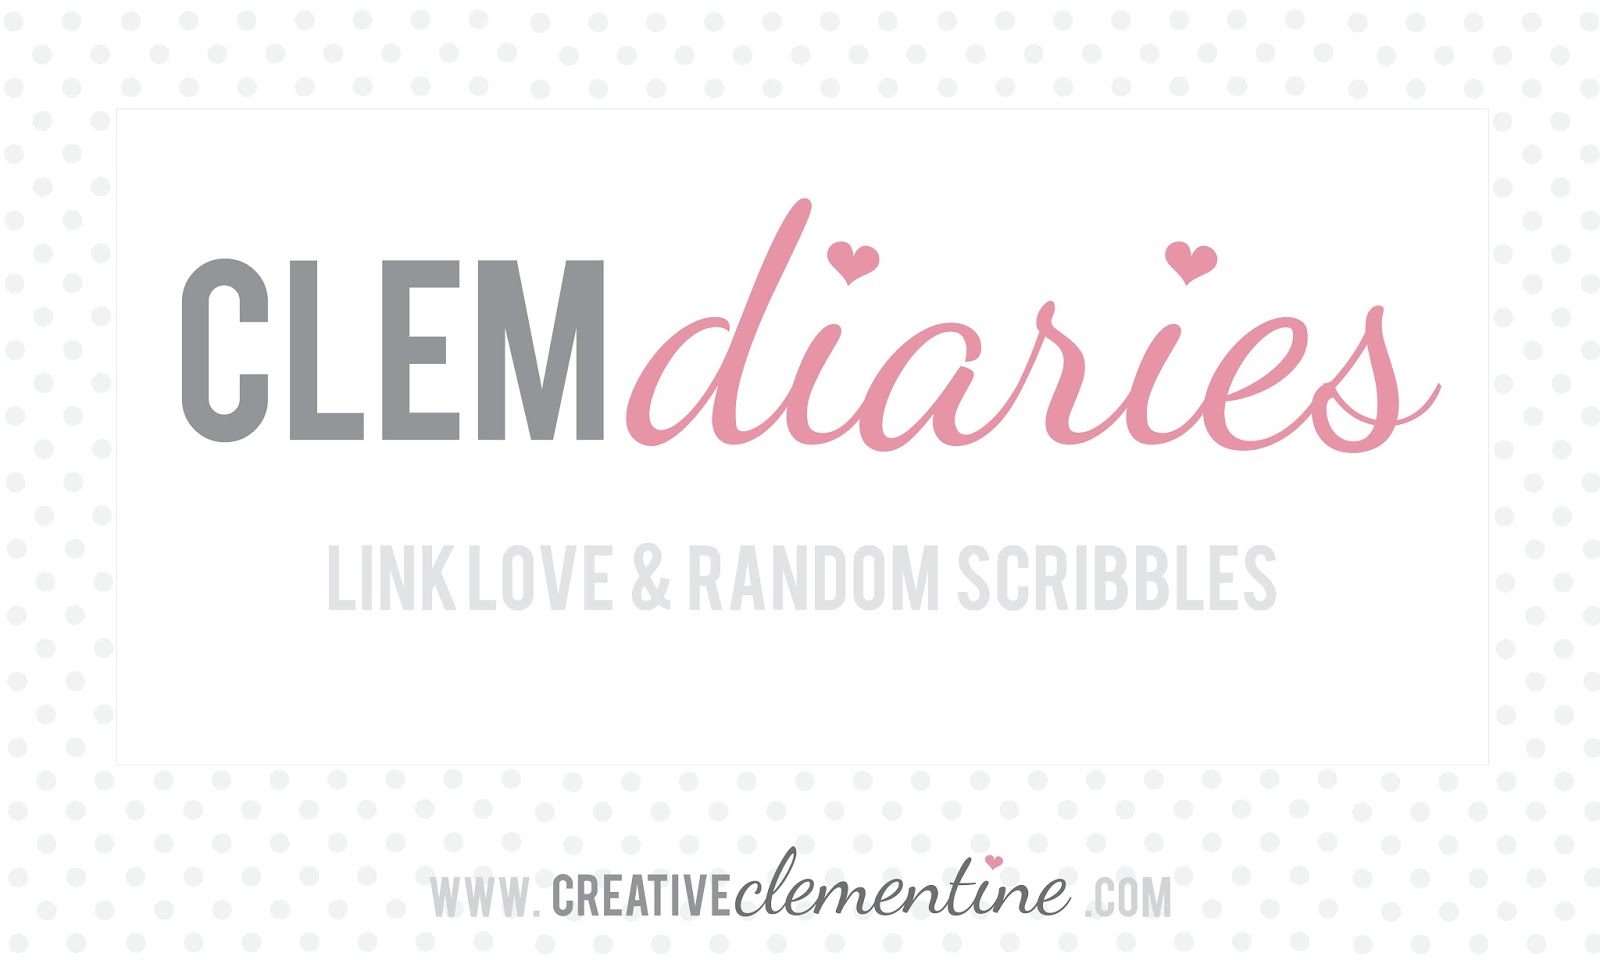 Clem Diaries on www.creativeclementine.com: A roundup of links to things I've done, made, cooked, eaten, bought, loved, or viewed lately.